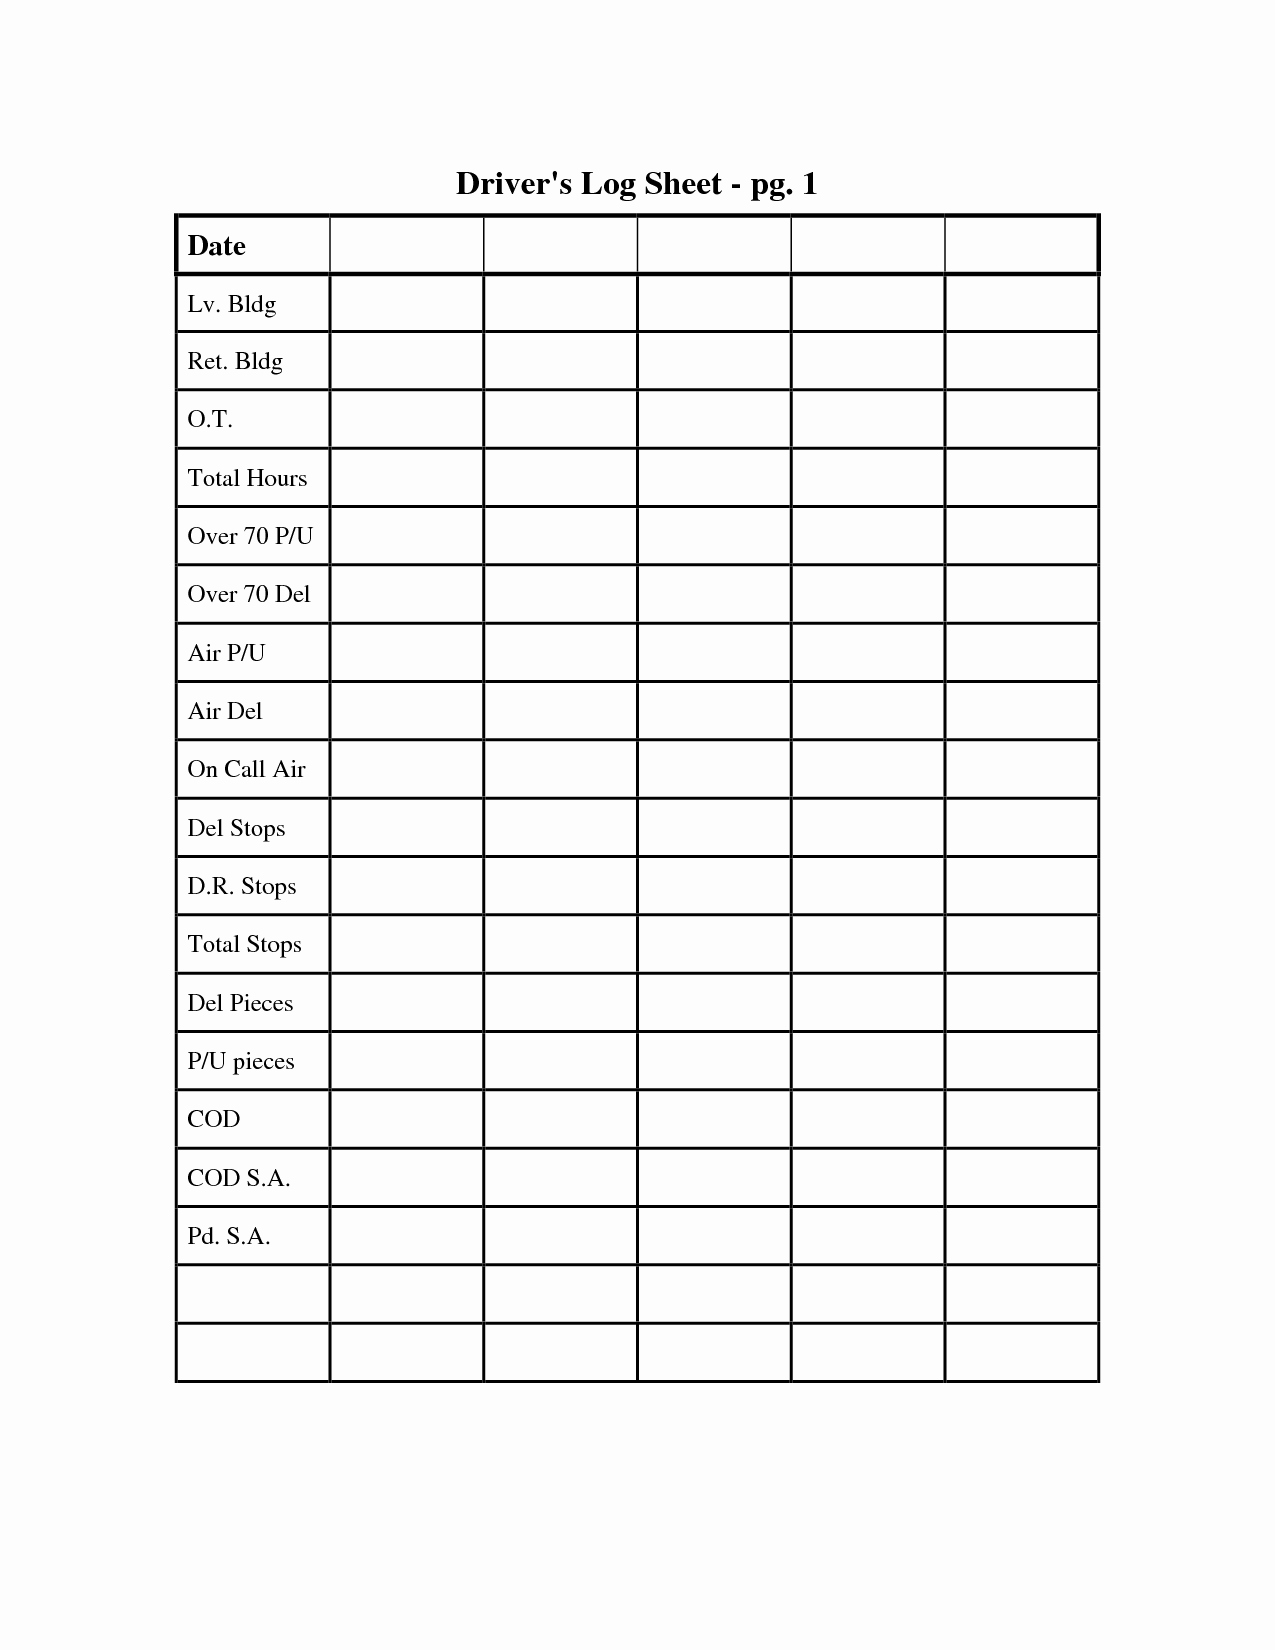 Drivers Log Book Template Free Lovely Best S Of Drivers Log Sheet Driver Log Sheet